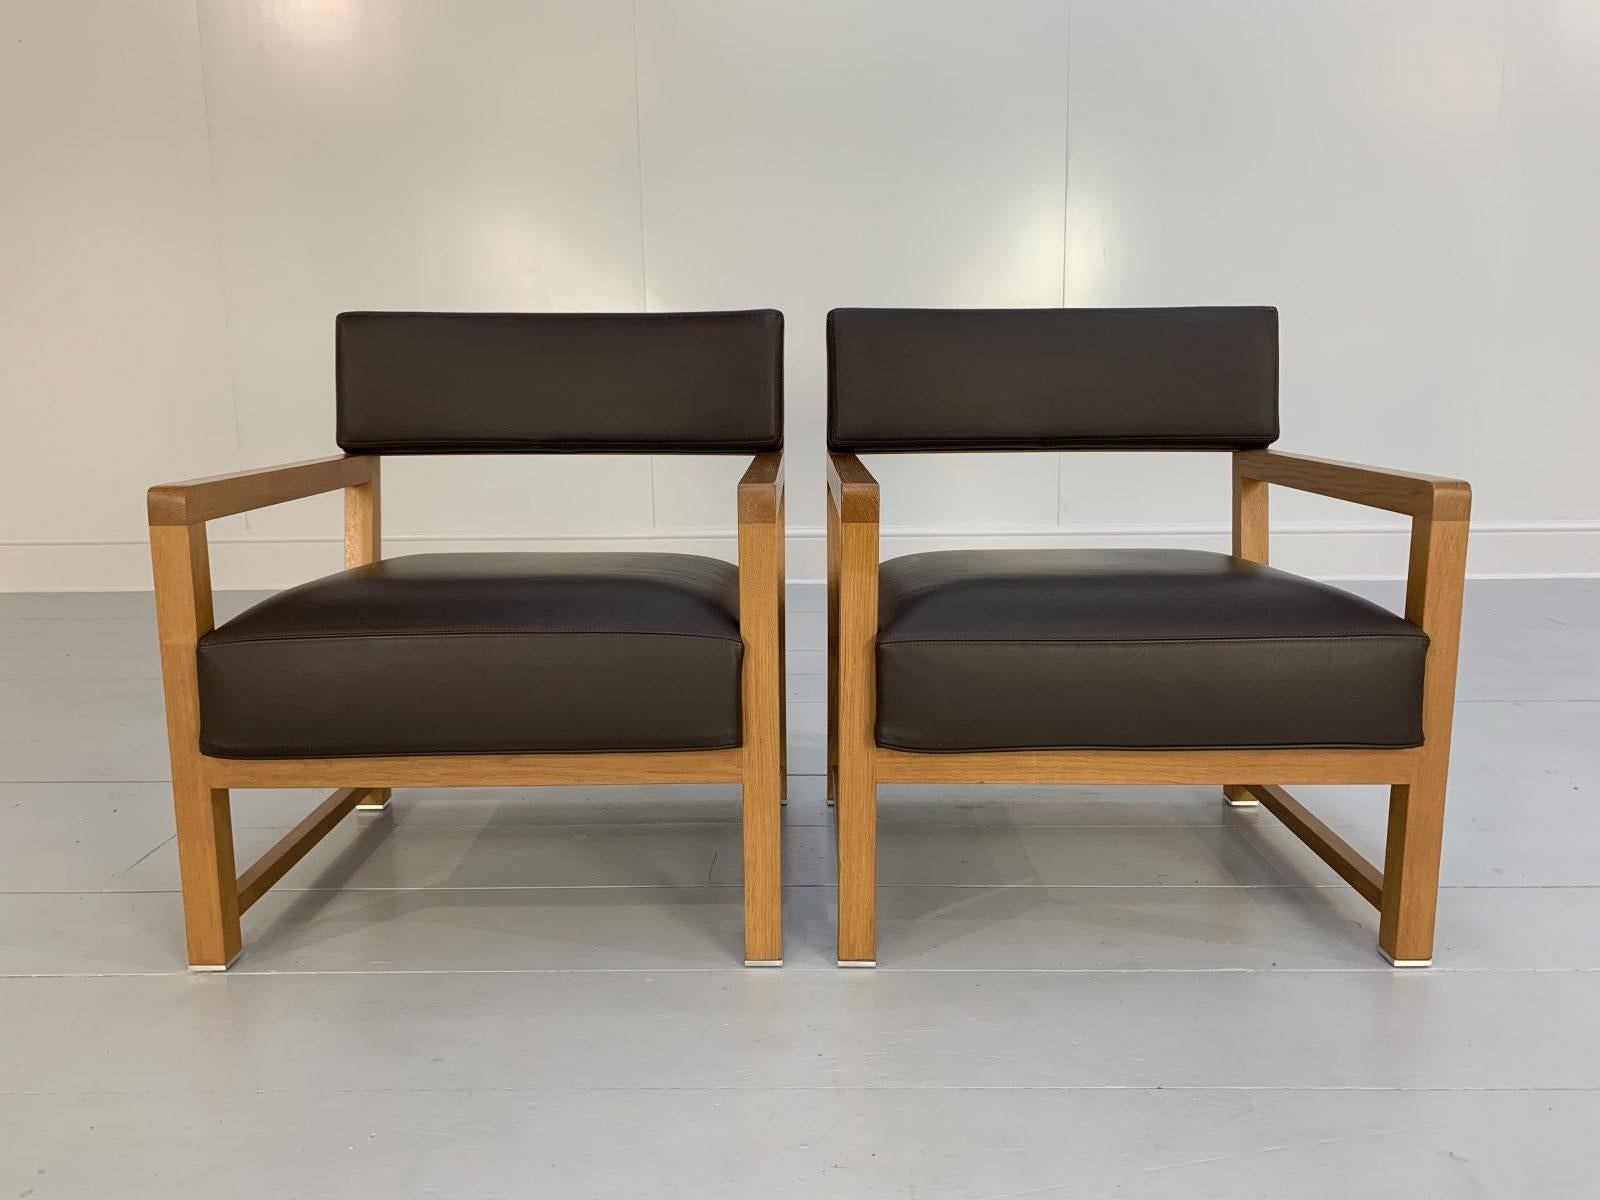 Contemporary Pair of B&B Italia “Maxalto” Armchairs in “Pelle” Leather and Wood For Sale